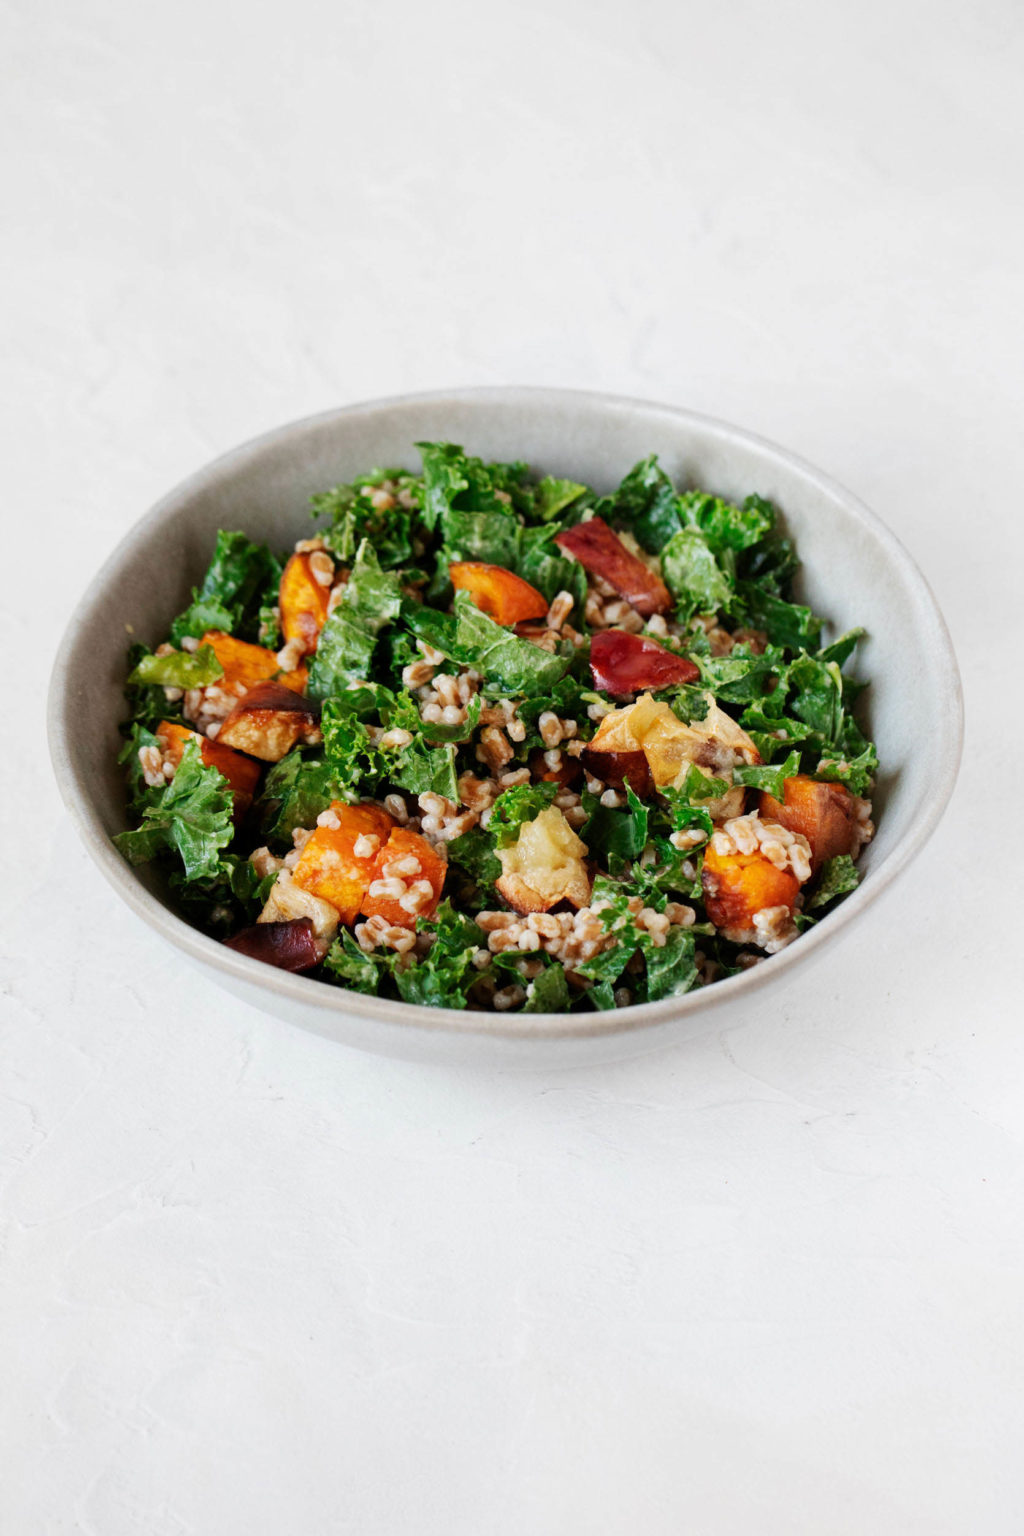 A white, ceramic salad bowl has been filled with a kale and whole grain salad. The salad contains orange sweet potato pieces and has a creamy dressing.